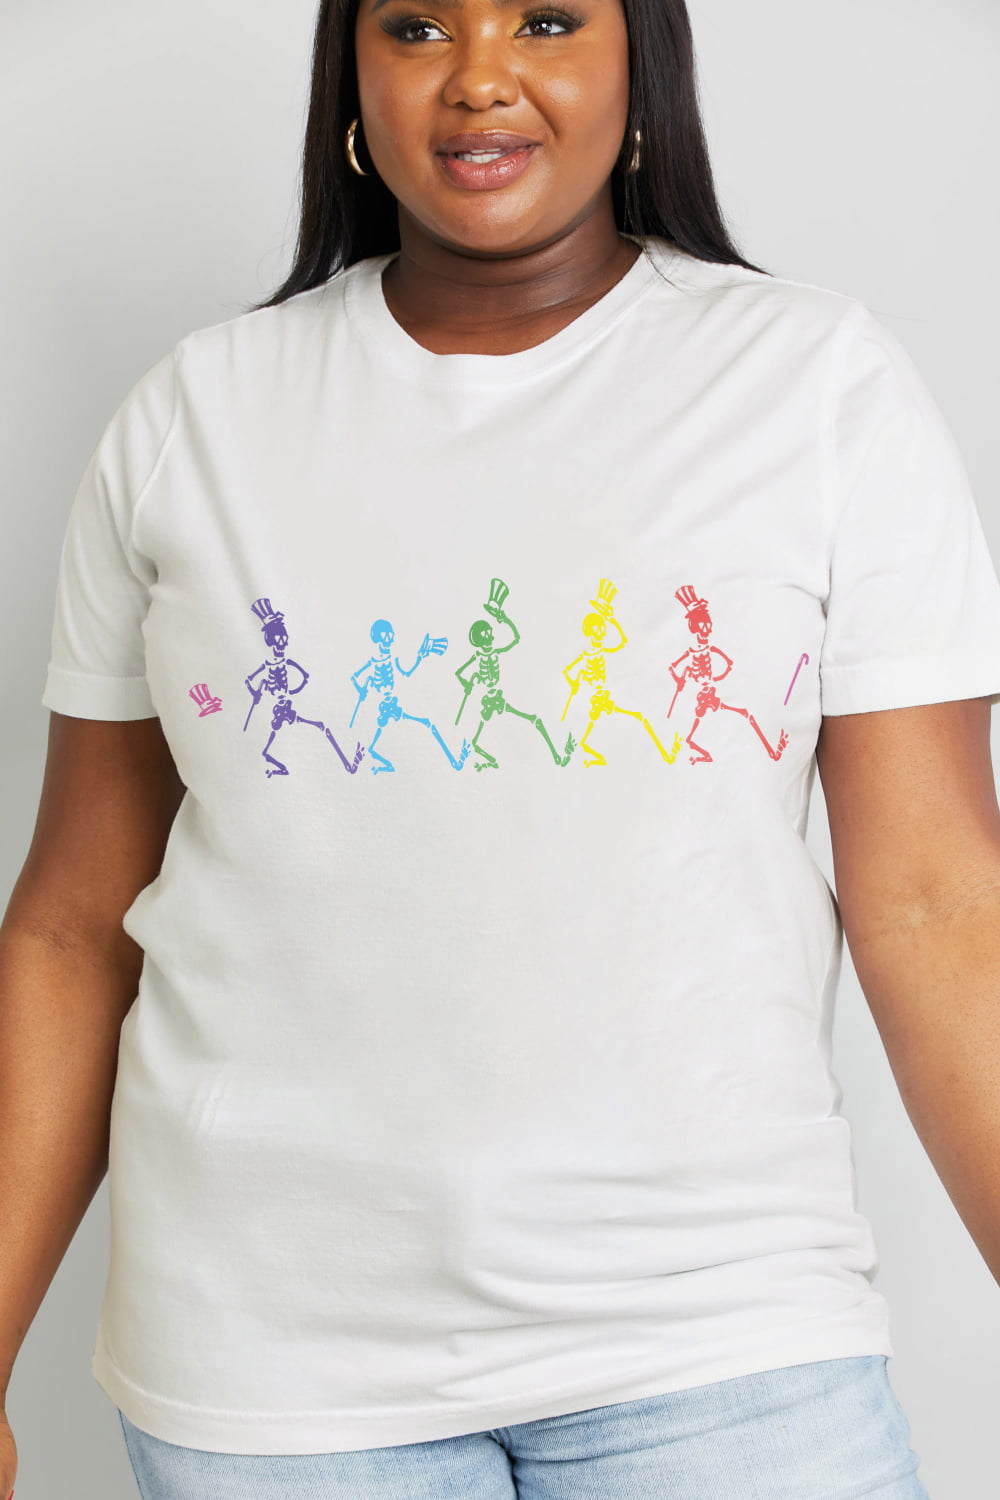 Full Size Dancing Skeleton Graphic Cotton Tee - T-Shirts - Shirts & Tops - 8 - 2024